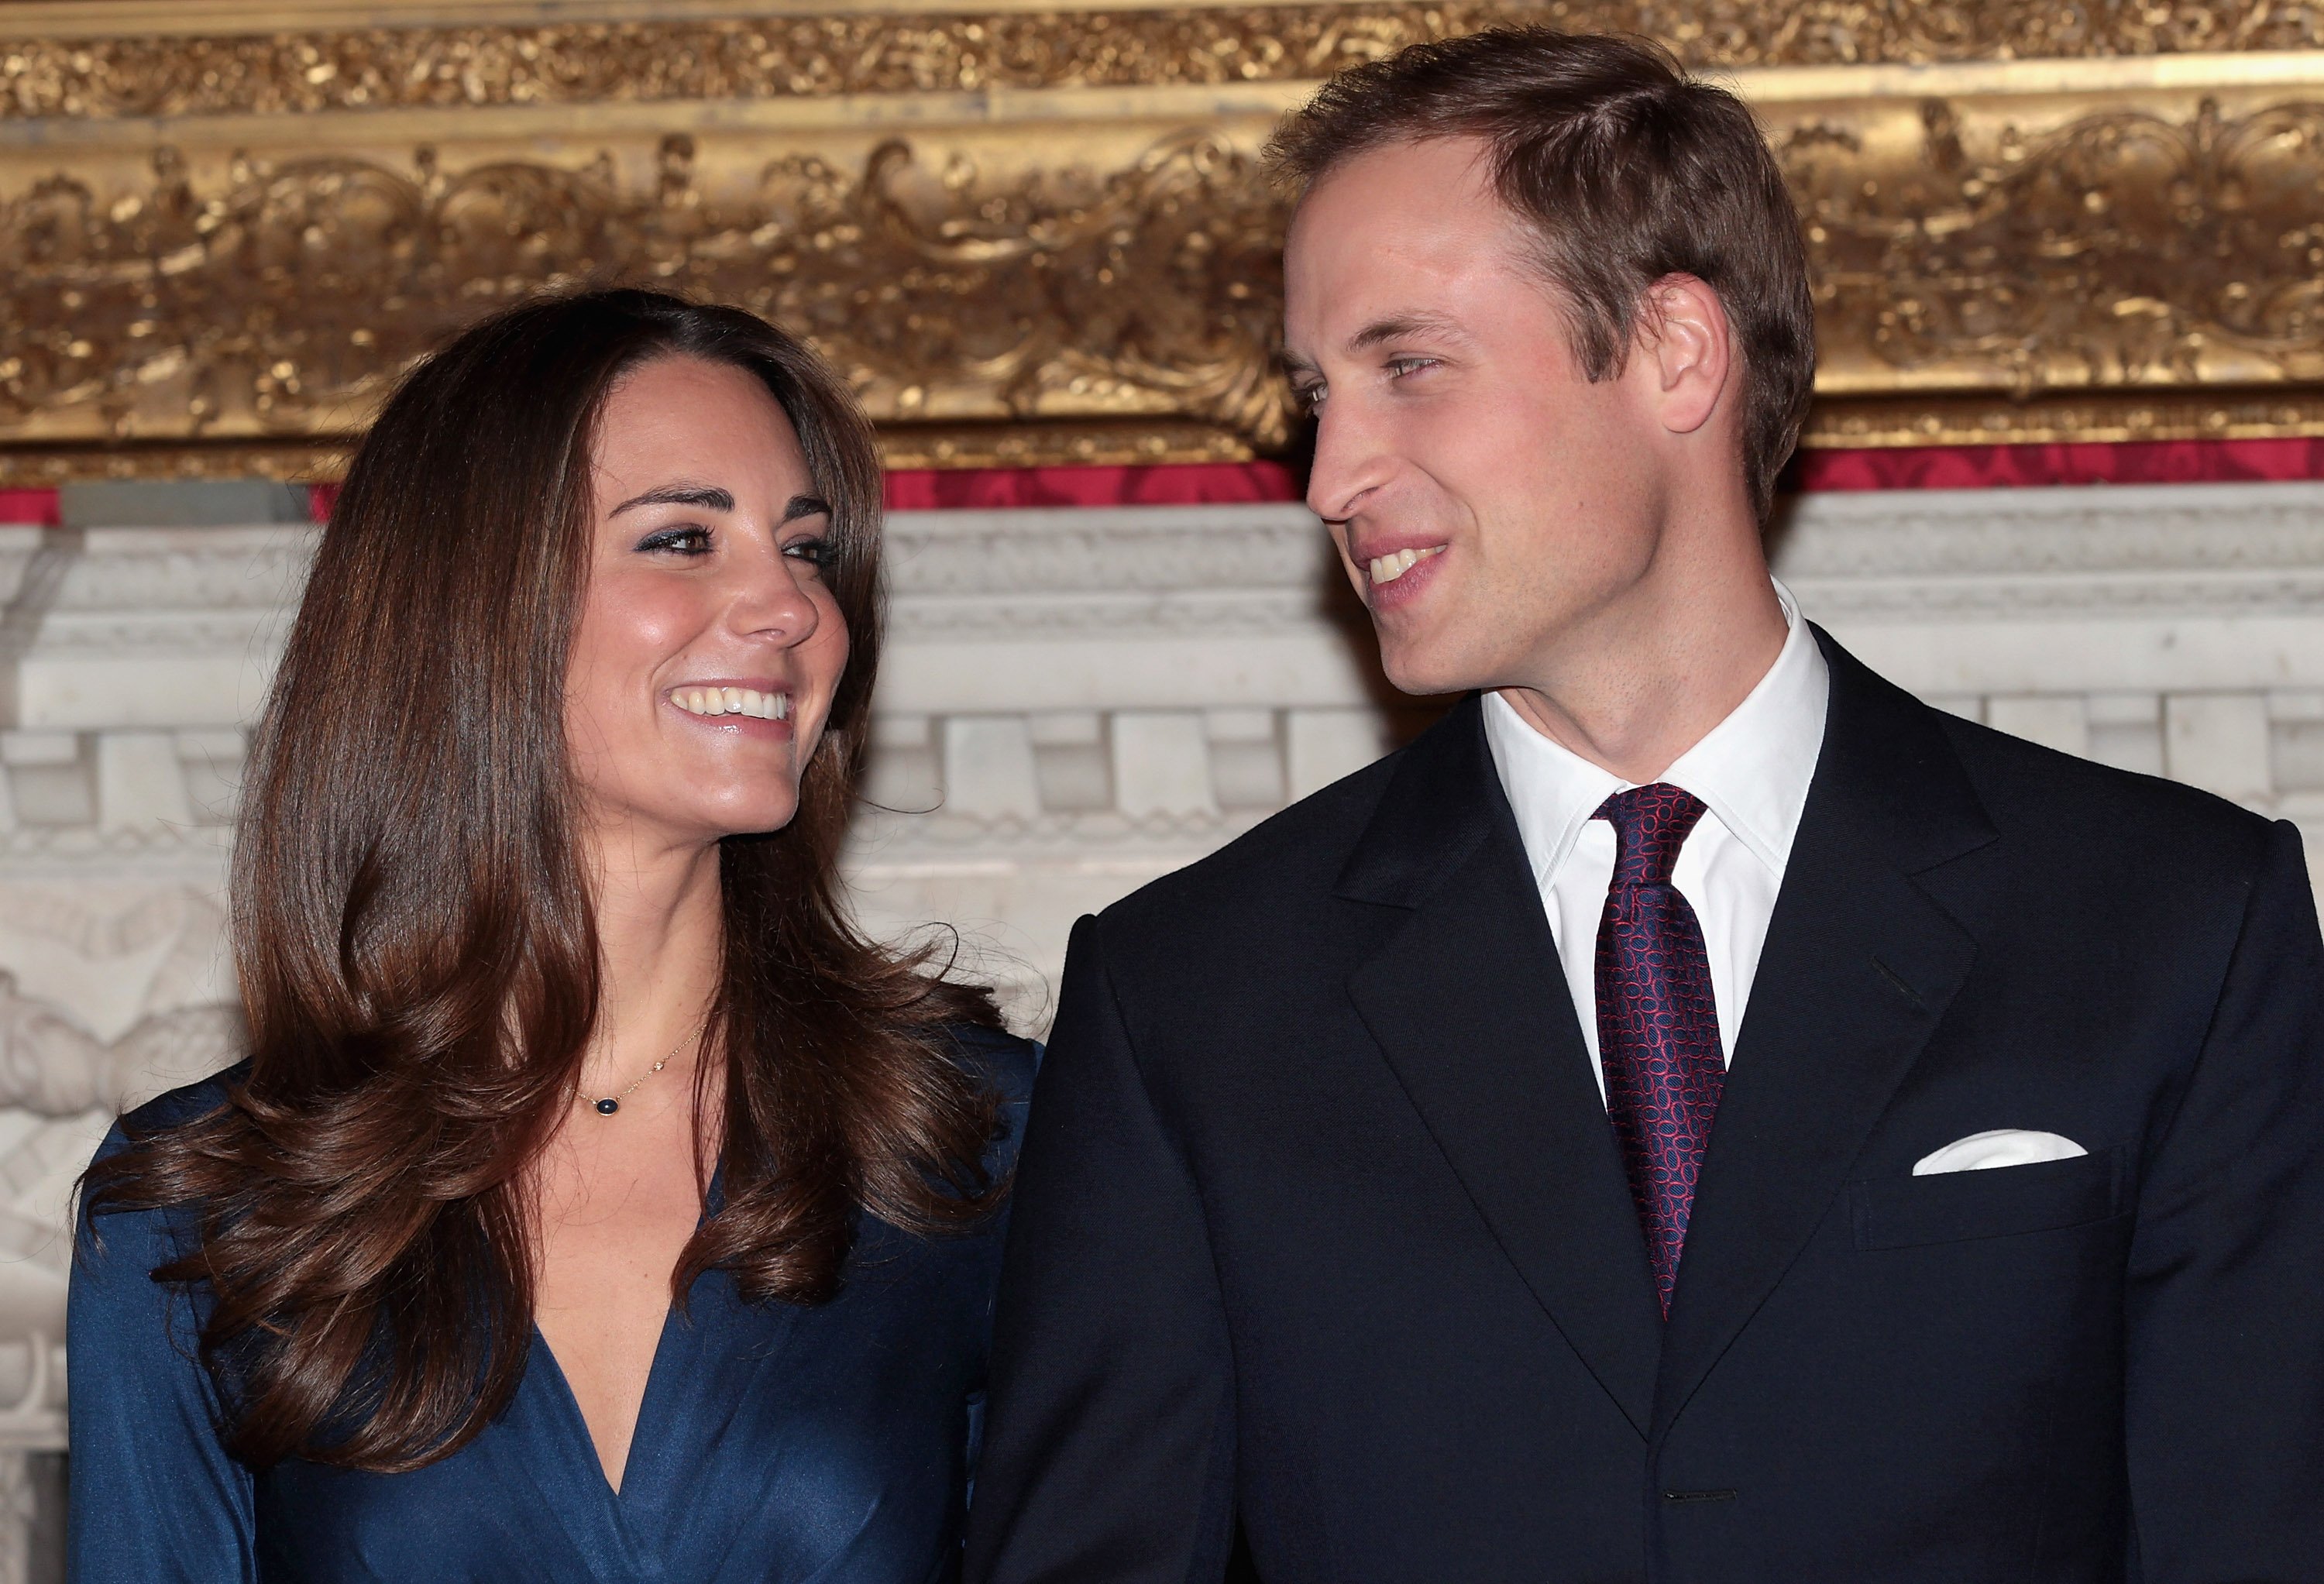 Prince William and Kate Middleton pose for photographs after announcing engagement